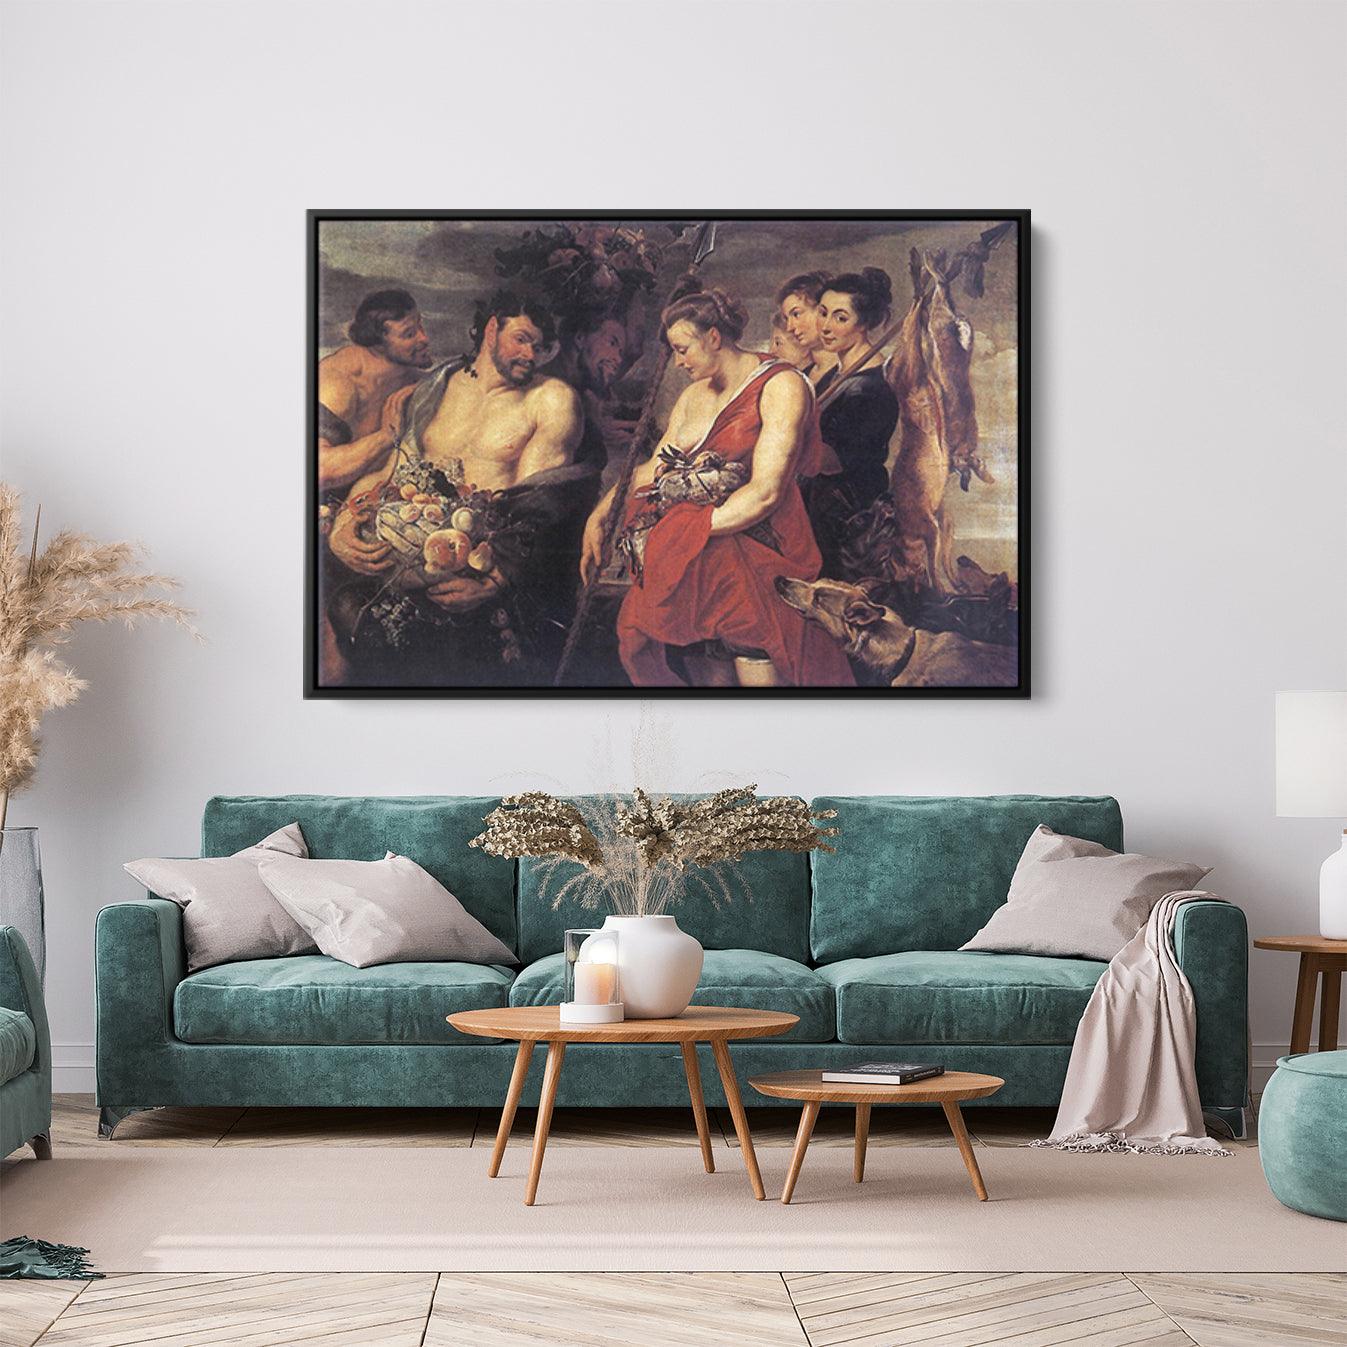 Number Painting for Adults Diana Presentig The Catch to Pan Painting by  Peter Paul Rubens Arts Craft for Home Wall Decor